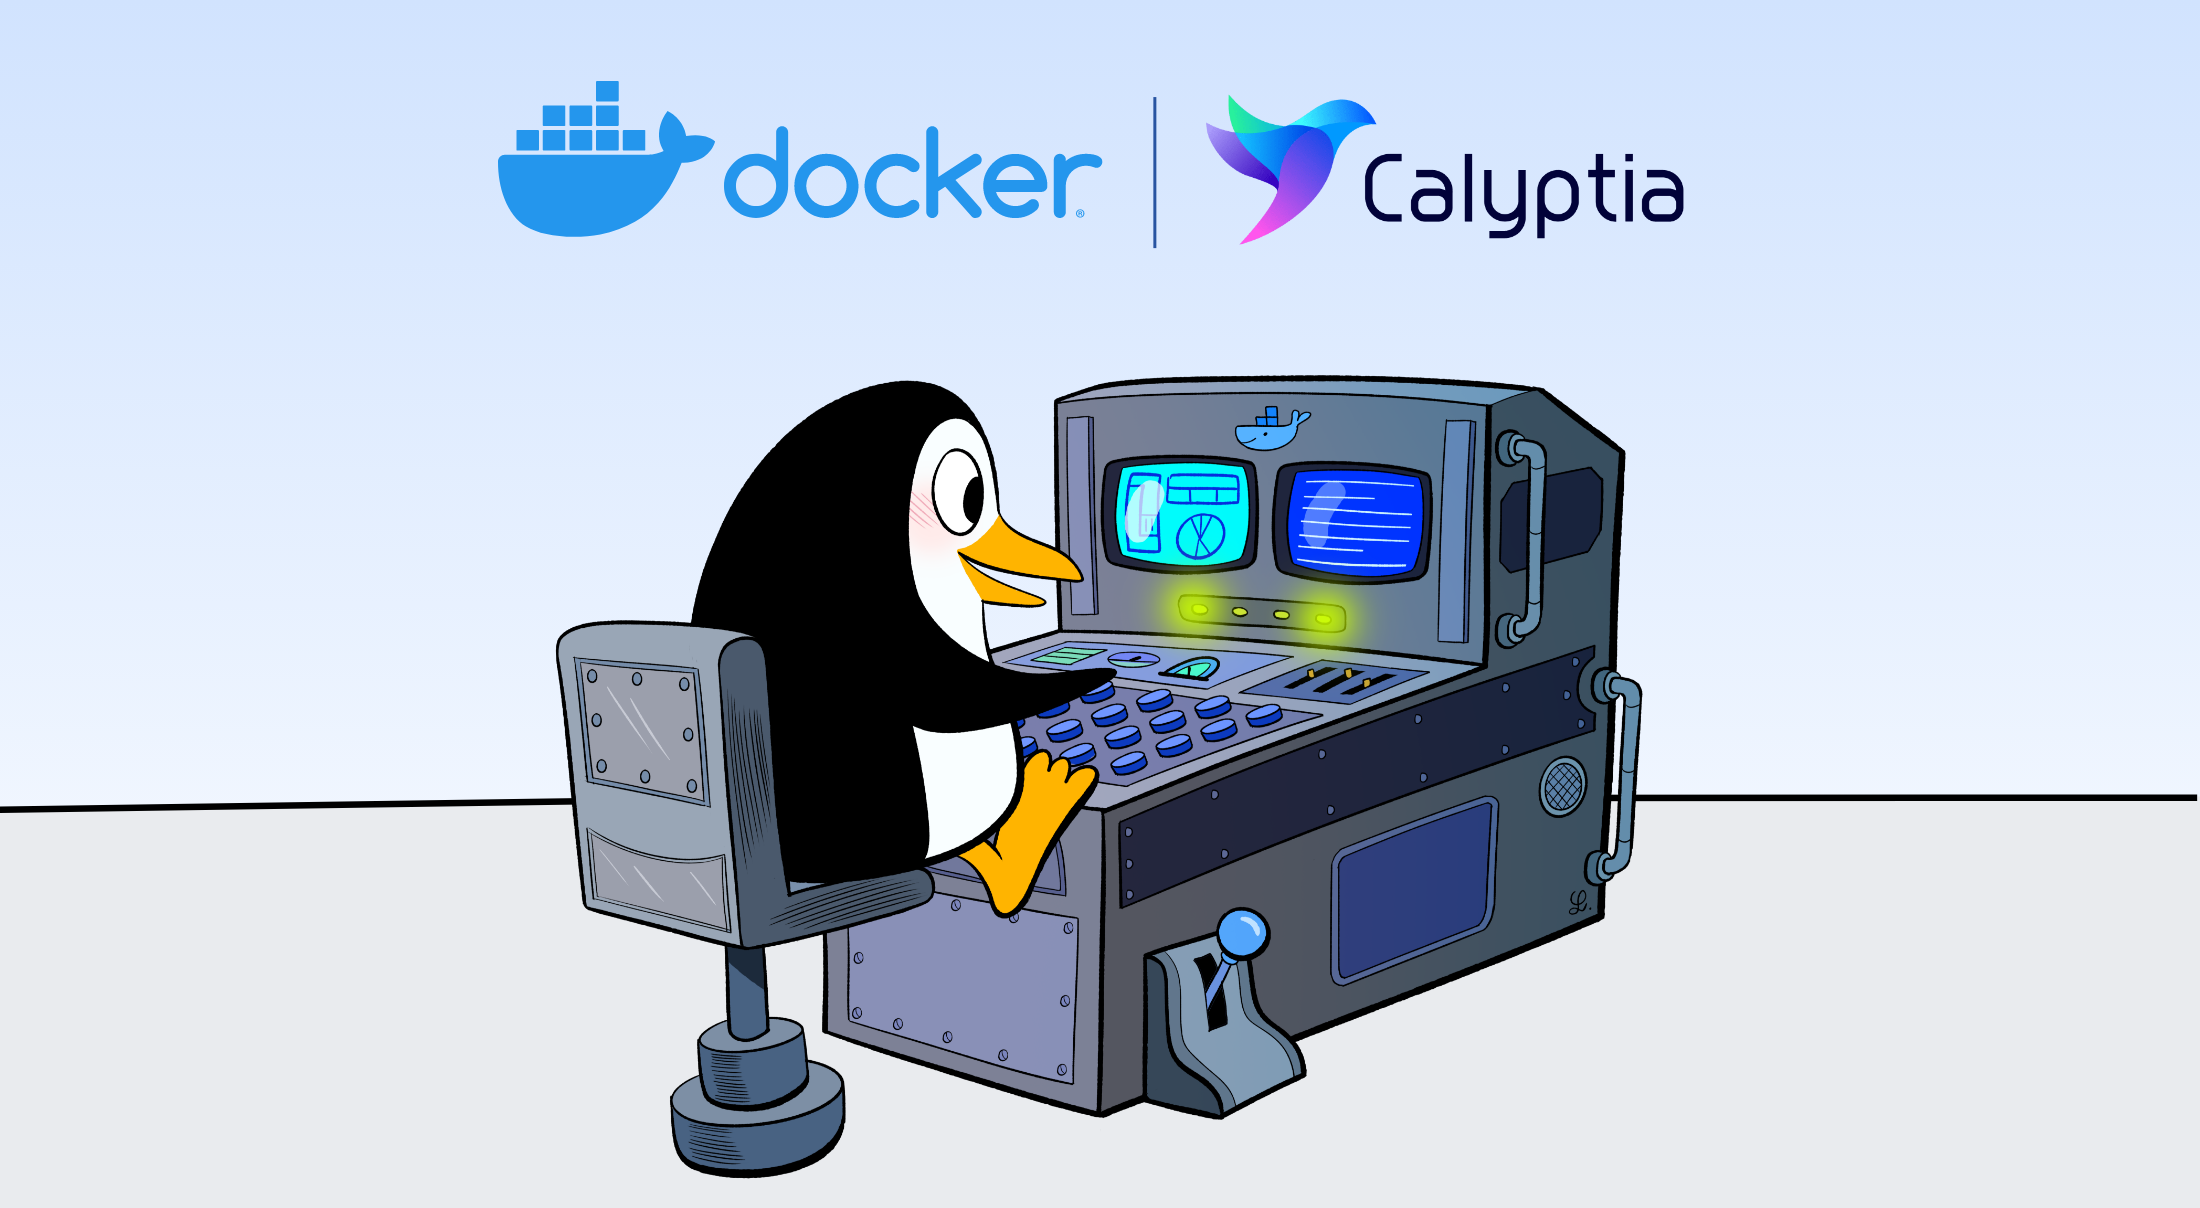 Manage observability pipelines with the calyptia core docker extension.